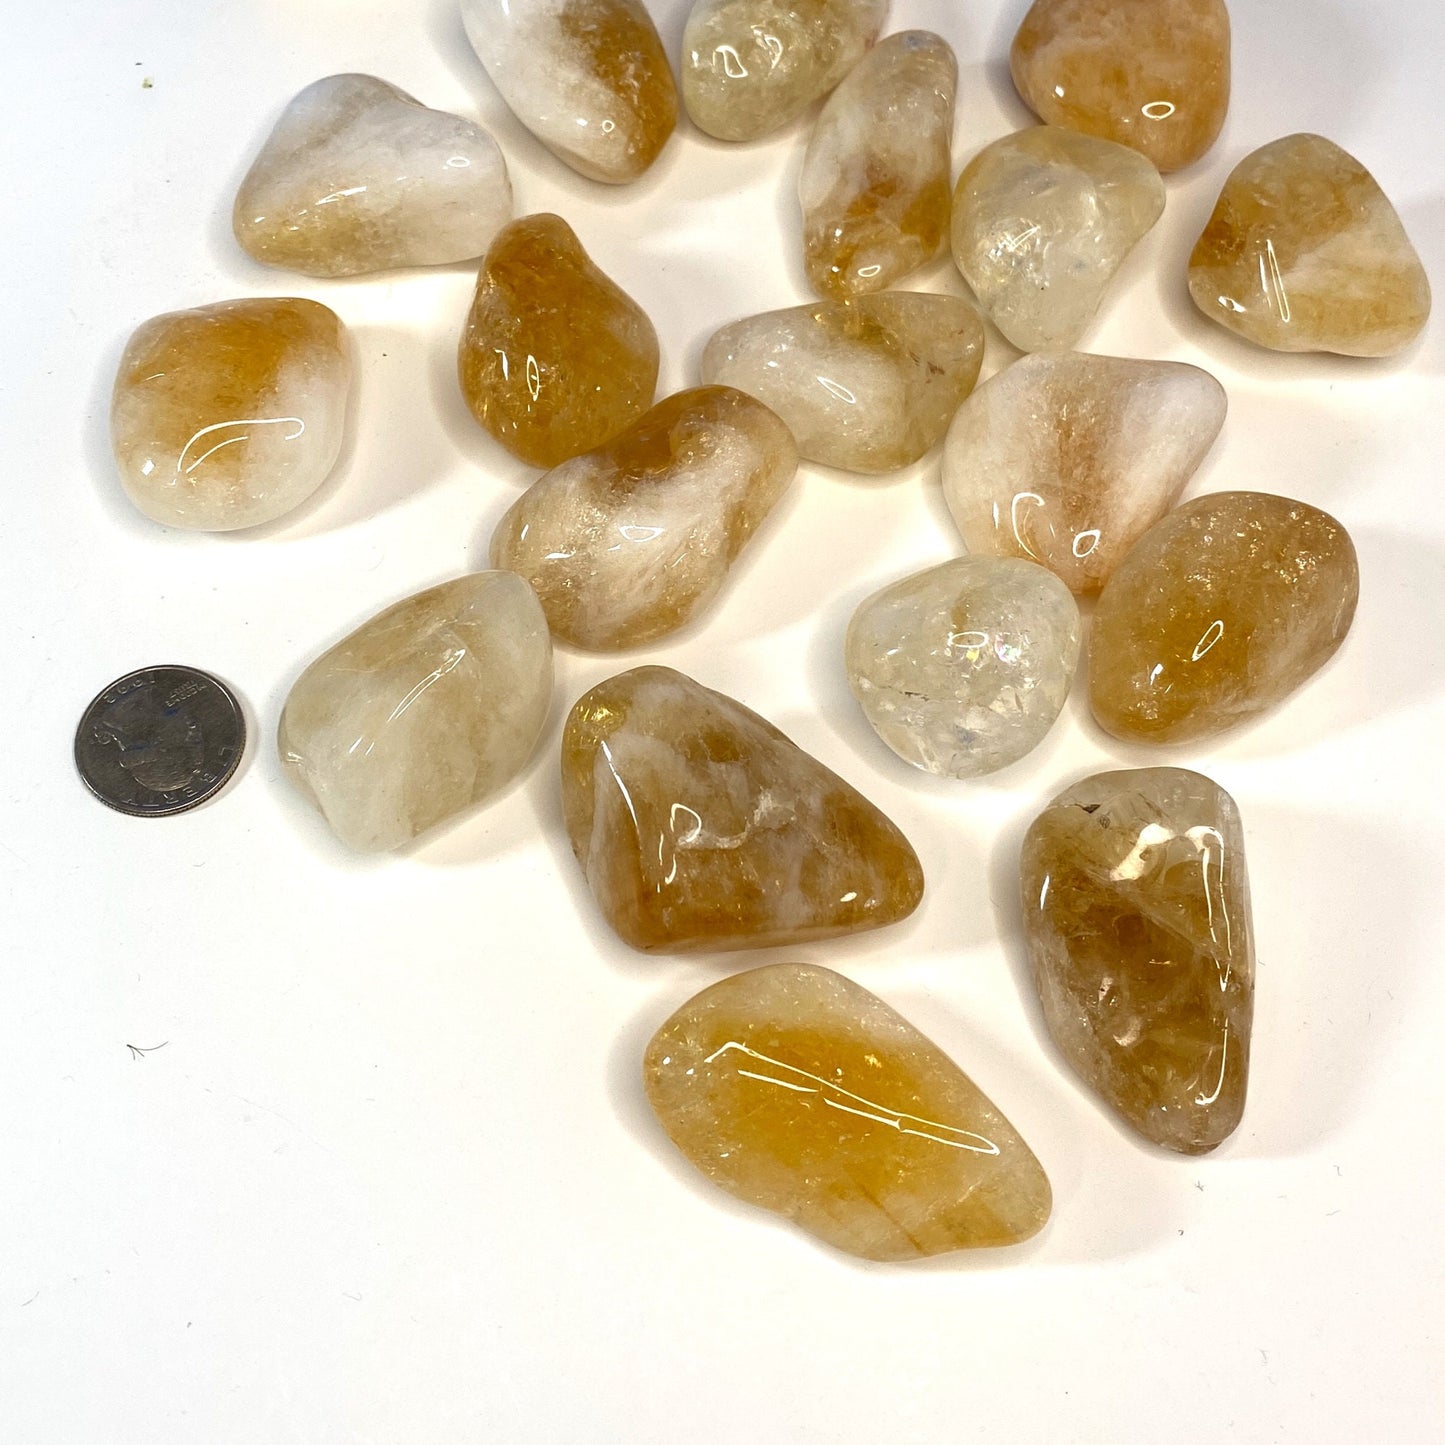 Natural Citrine Crystal - Yellow Tumbled Stone - Abundance and Happiness Crystals - genuine stones for crown, sacral, solar plexus chakra